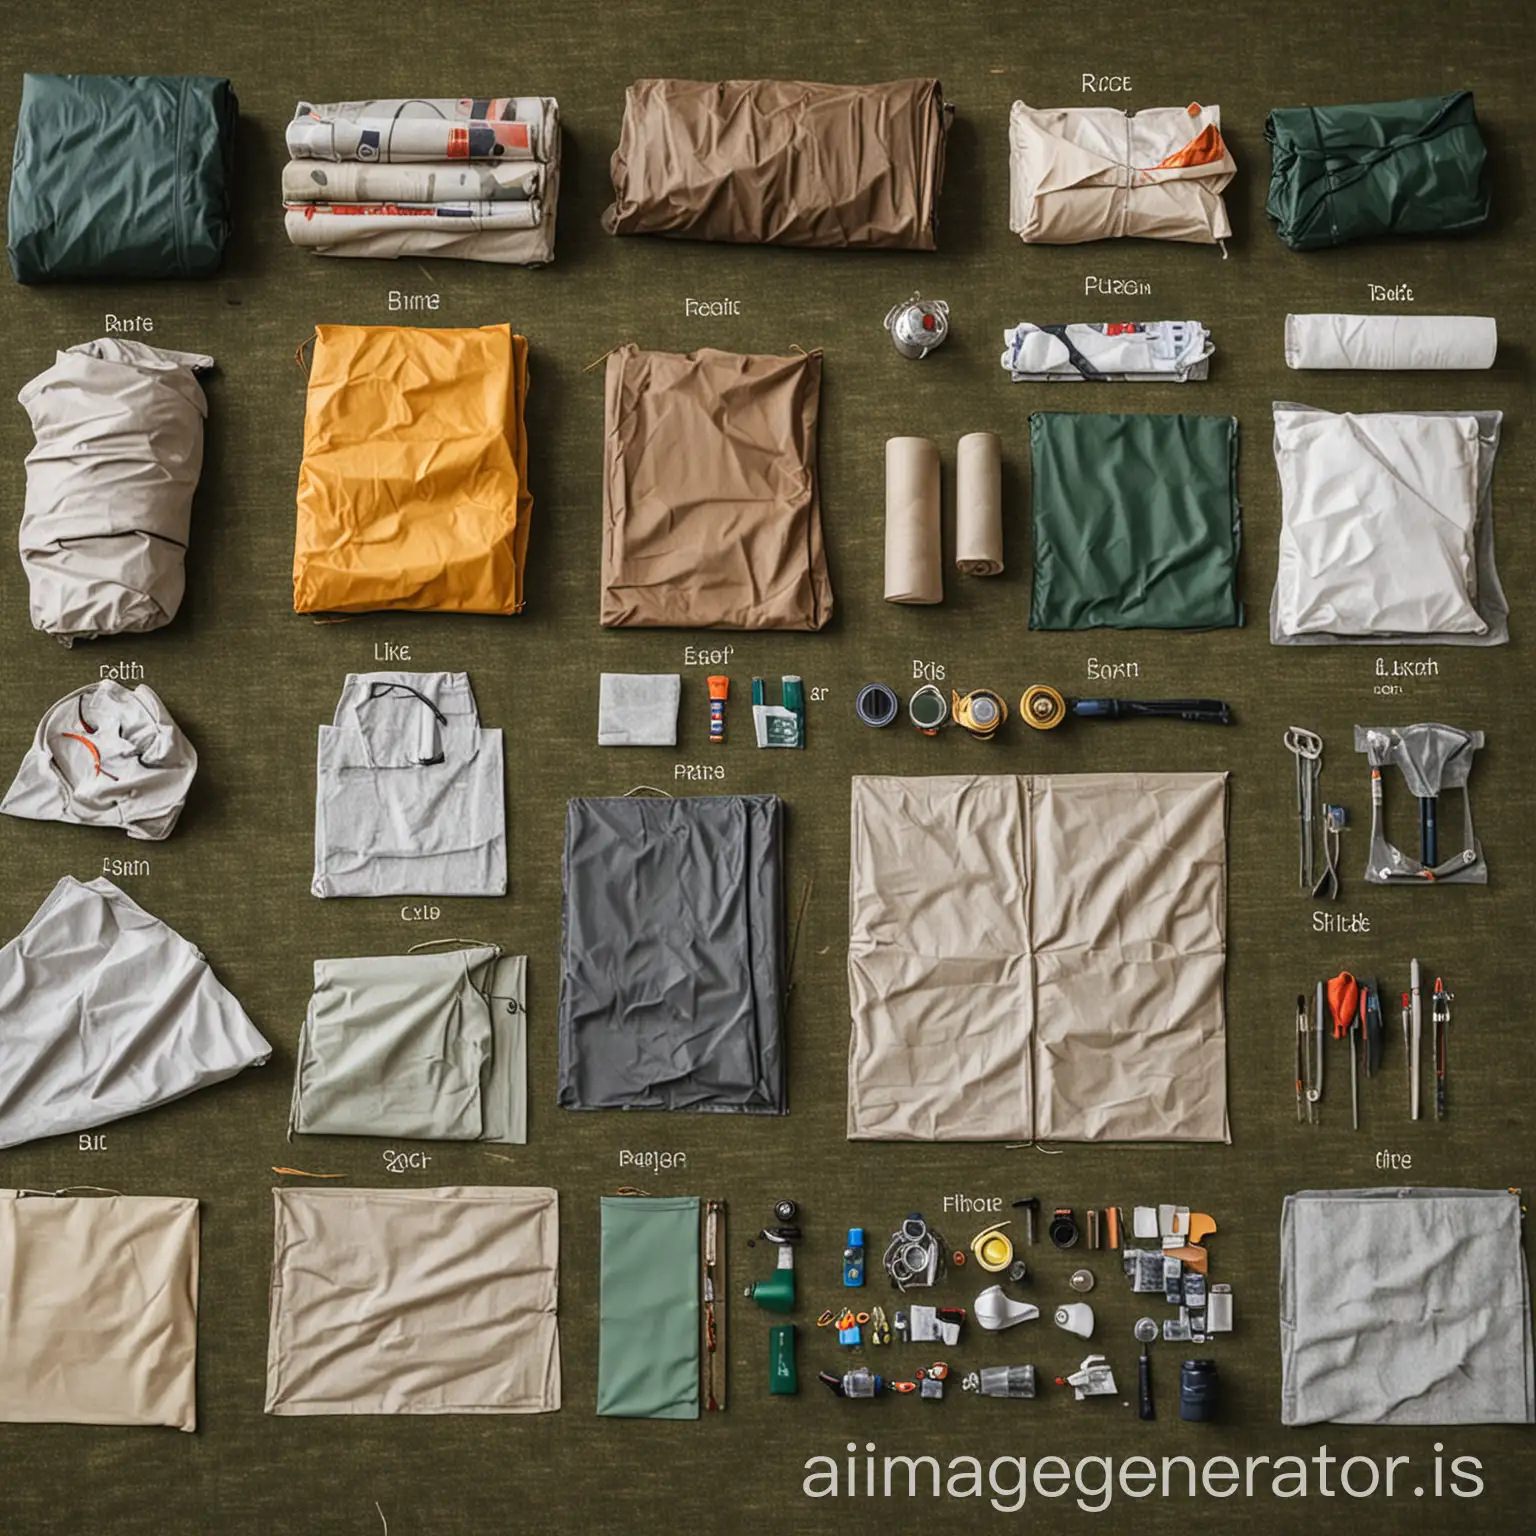 Camping-Tent-Material-Selection-Guide-Waterproof-Fabrics-Lightweight-Textiles-and-More